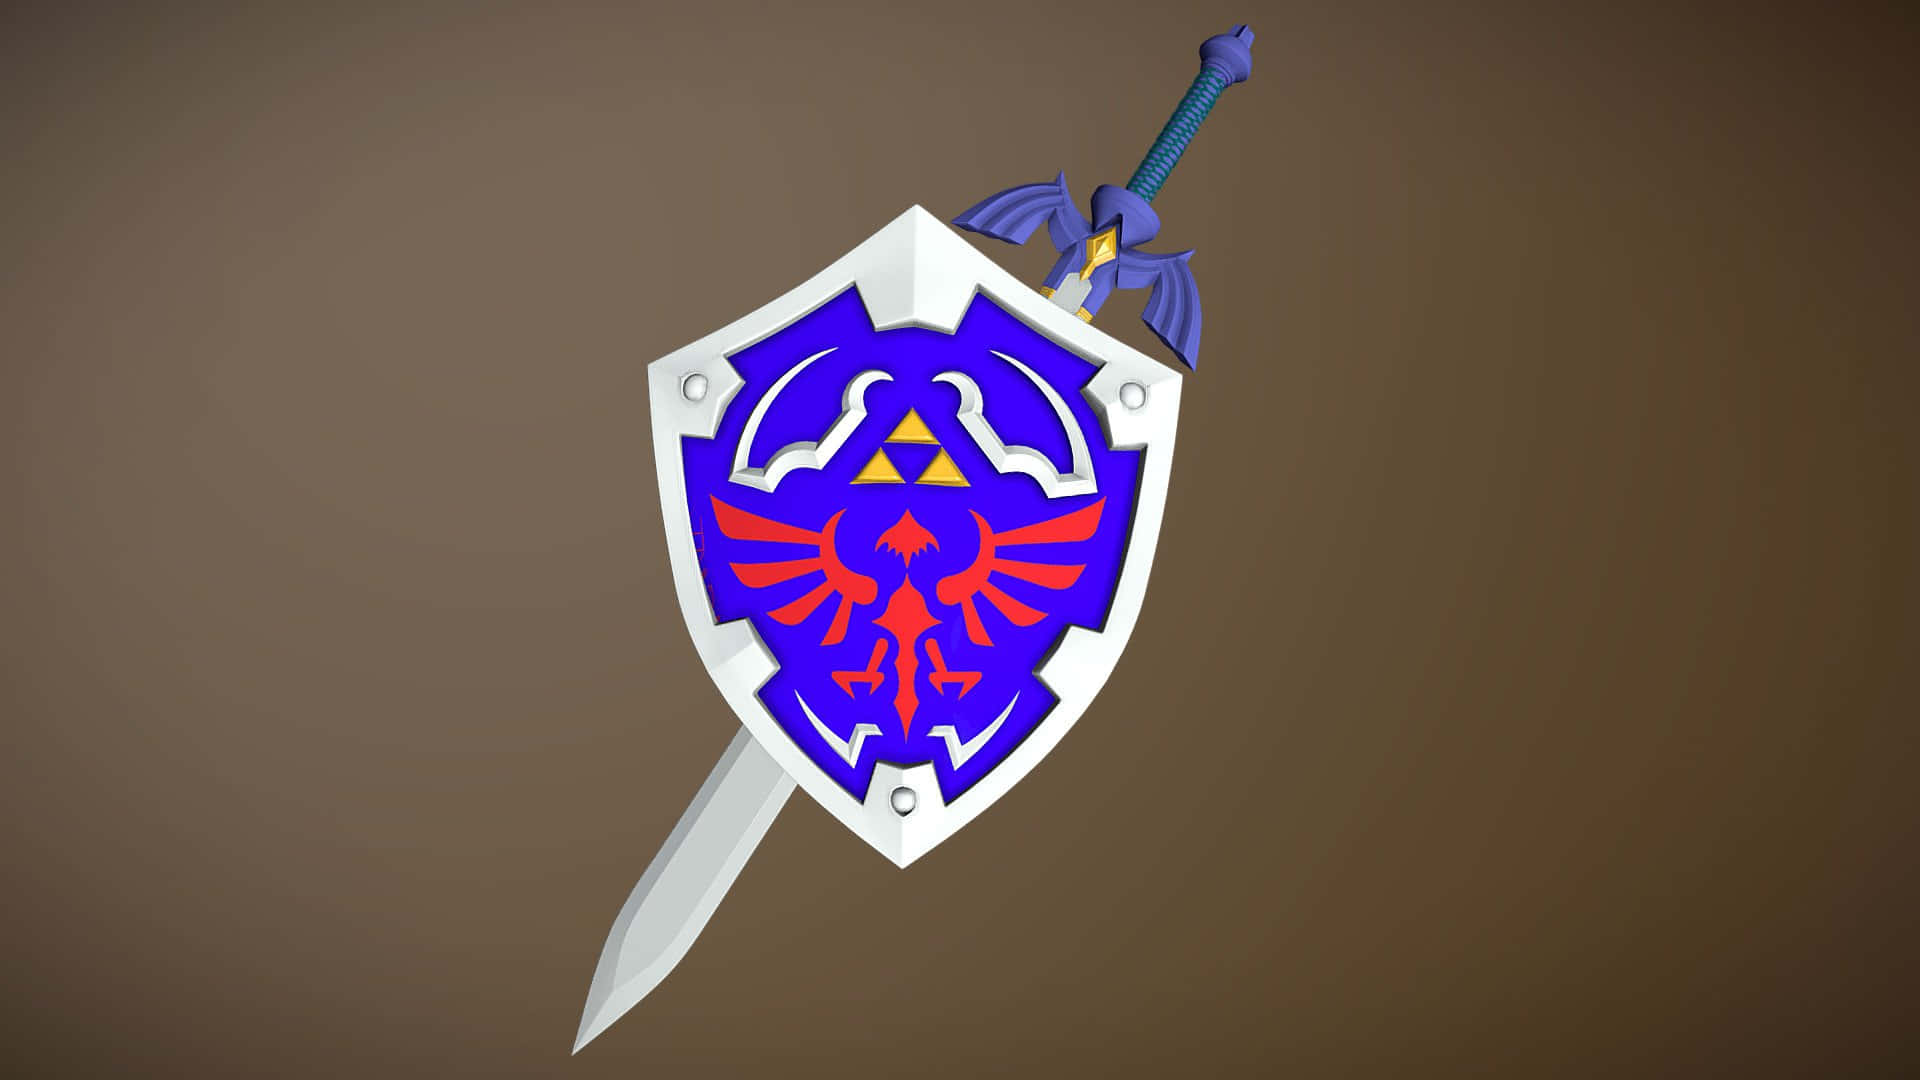 Powerful Protector Shield Background